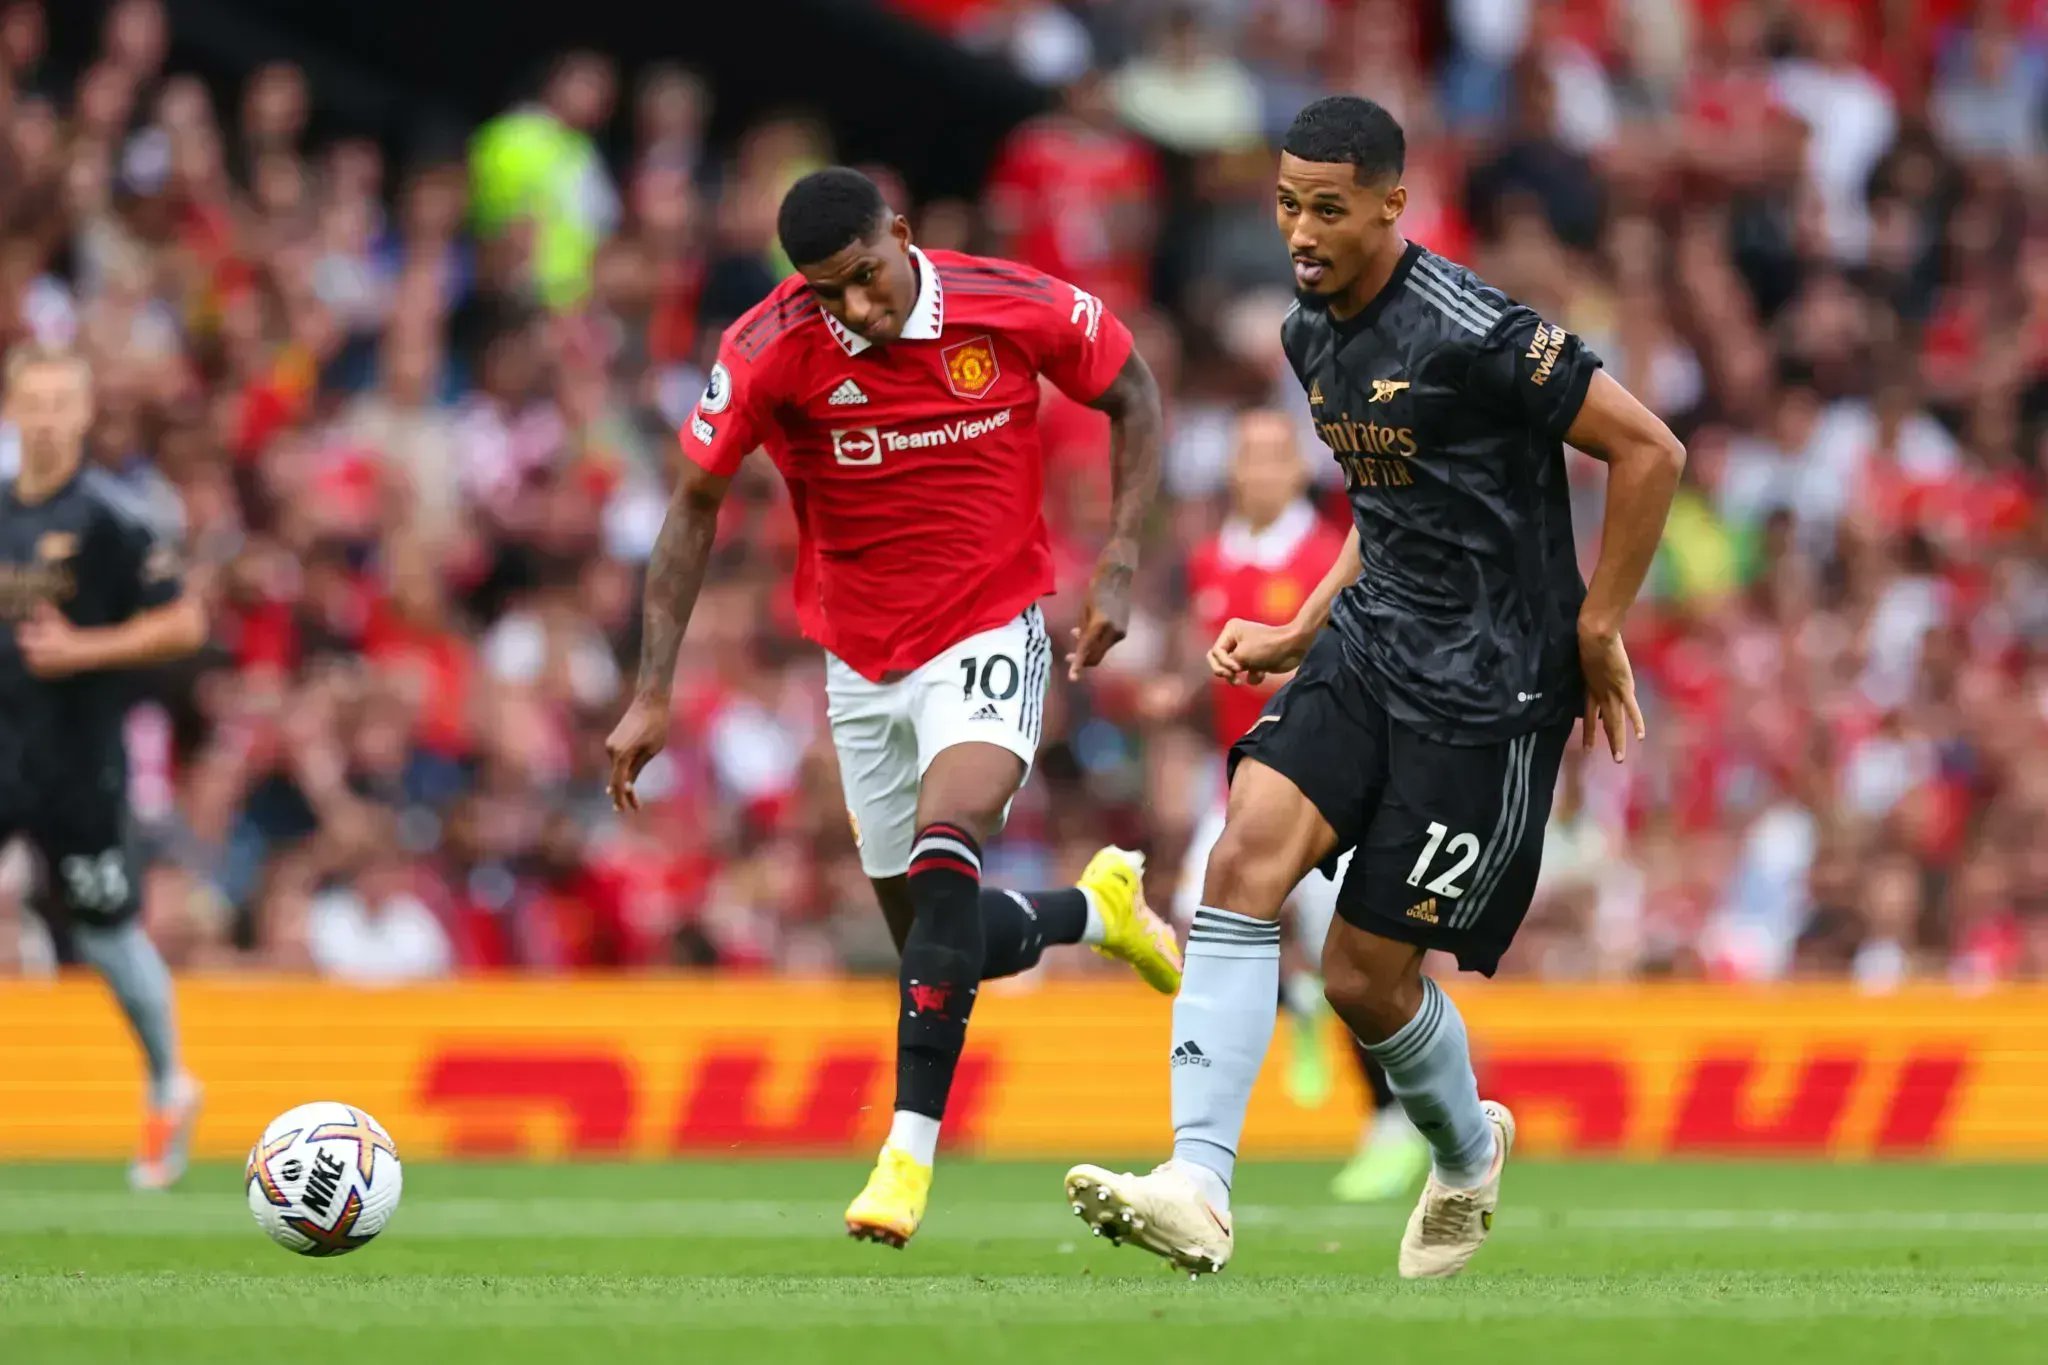 Stretford Paddock on X: "Arsenal fans are talking up Saliba as being the  best centre back in the world. Marcus Rashford has already destroyed that  narrative. #MUFC https://t.co/GksEVJsvon" / X